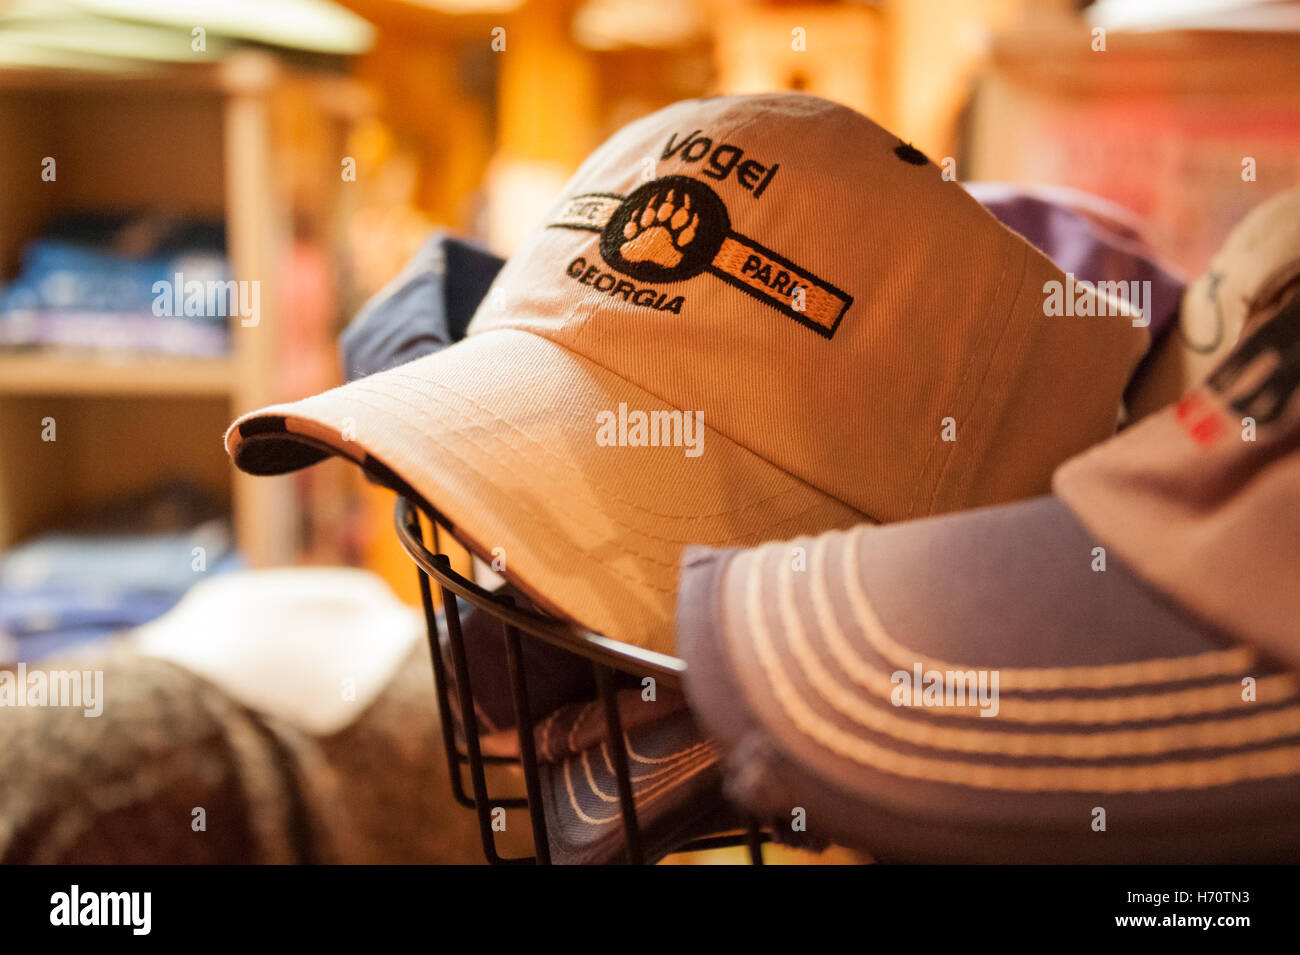 Vogel State Park headwear at the park's registration office gift shop in the Blue Ridge Mountains near Blairsville, Georgia. Stock Photo